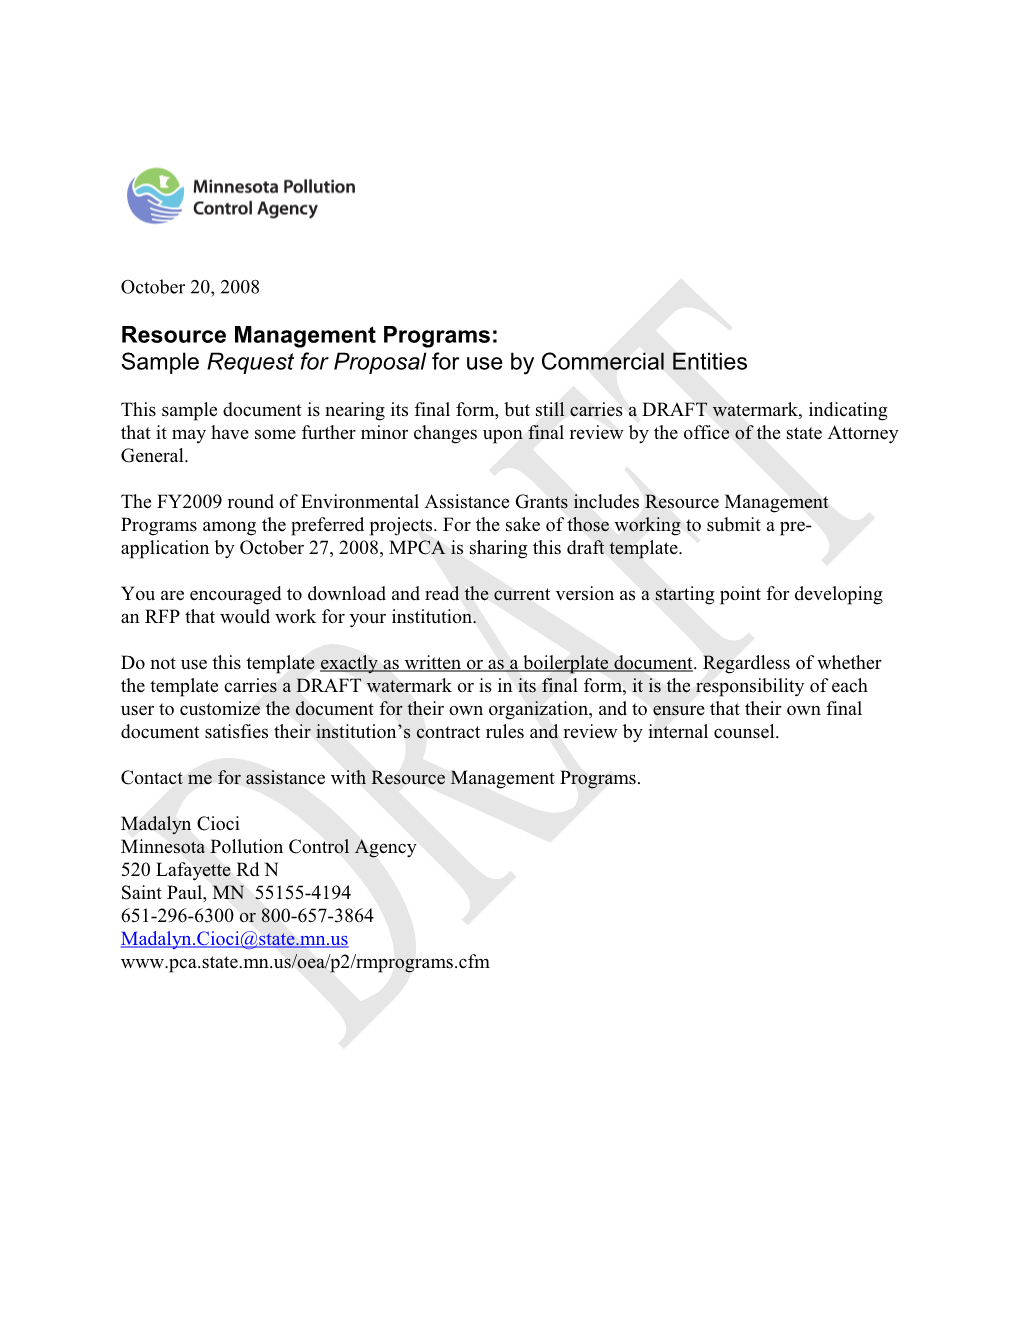 Resource Management Programs: Samplerequest for Proposal for Use by Commercial Entities